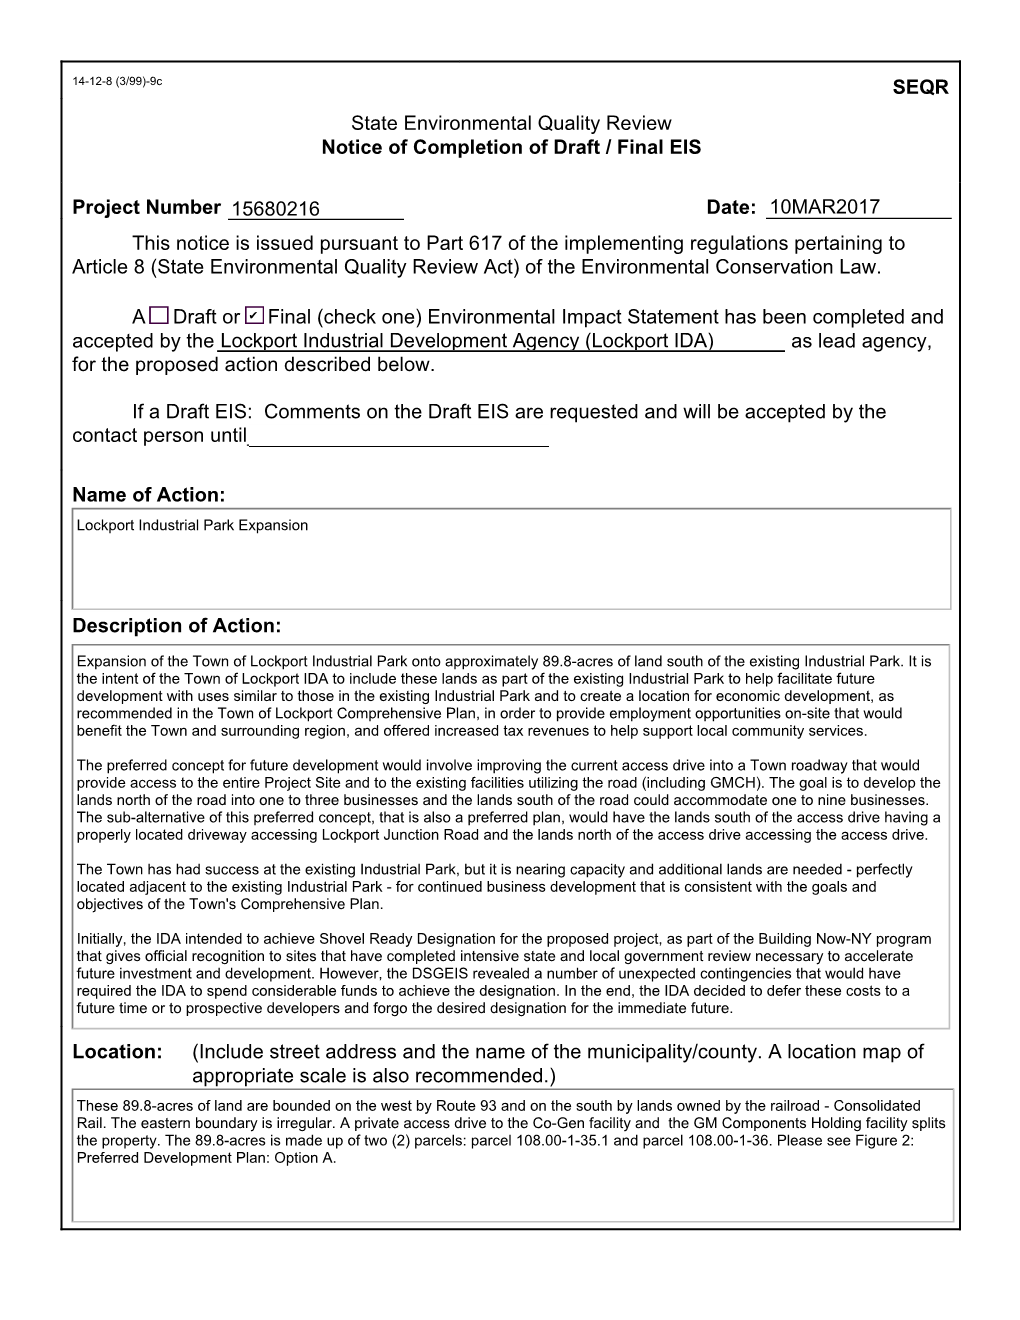 SEQR State Environmental Quality Review Notice of Completion of Draft / Final EIS